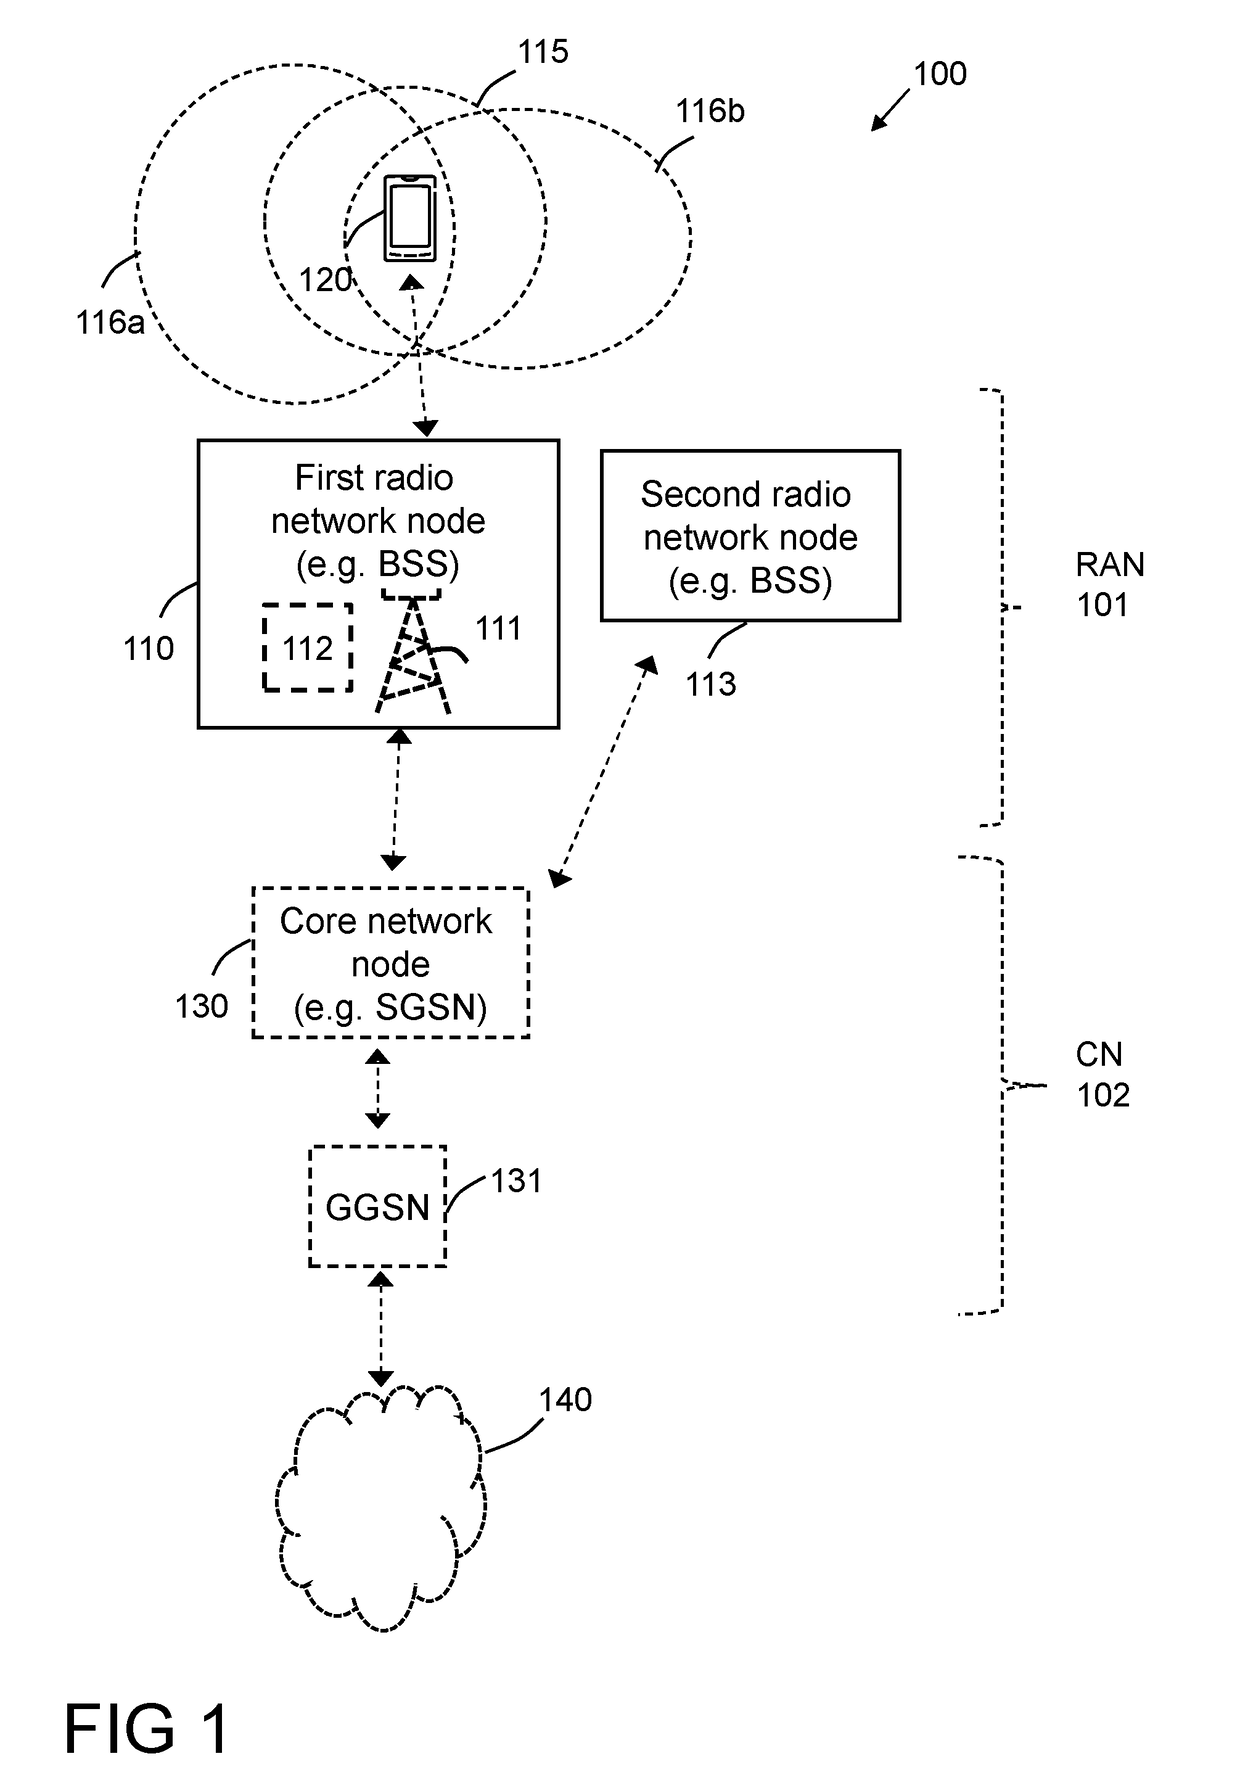 Methods and Arrangements for Supporting Cell Selection and Cell Reselection in a Wireless Communication Network